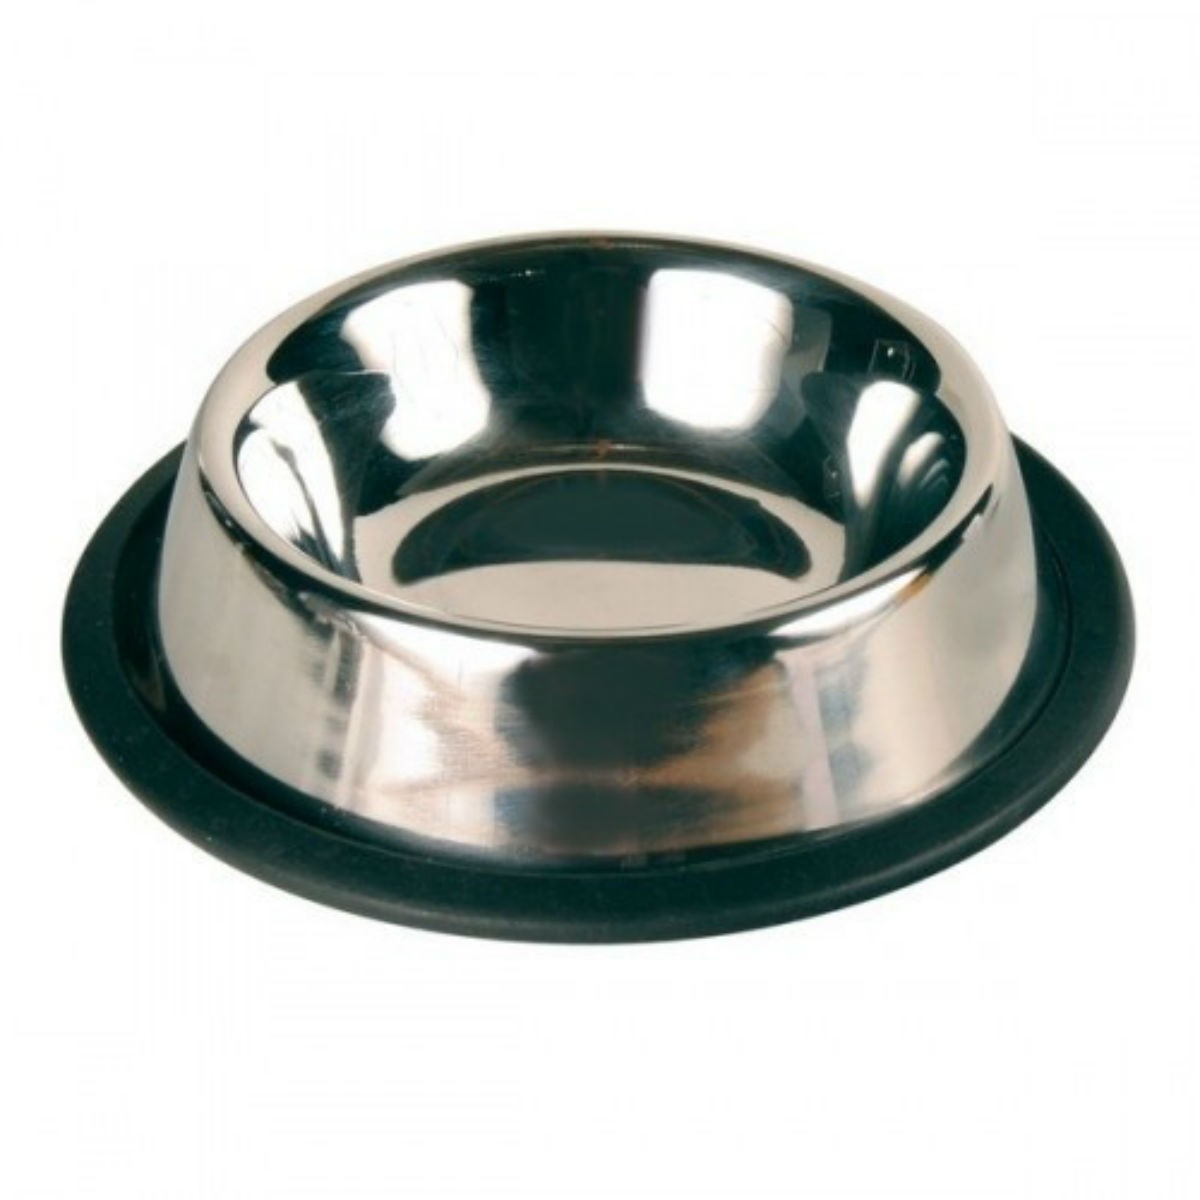 Stable stainless steel bowl 300ml